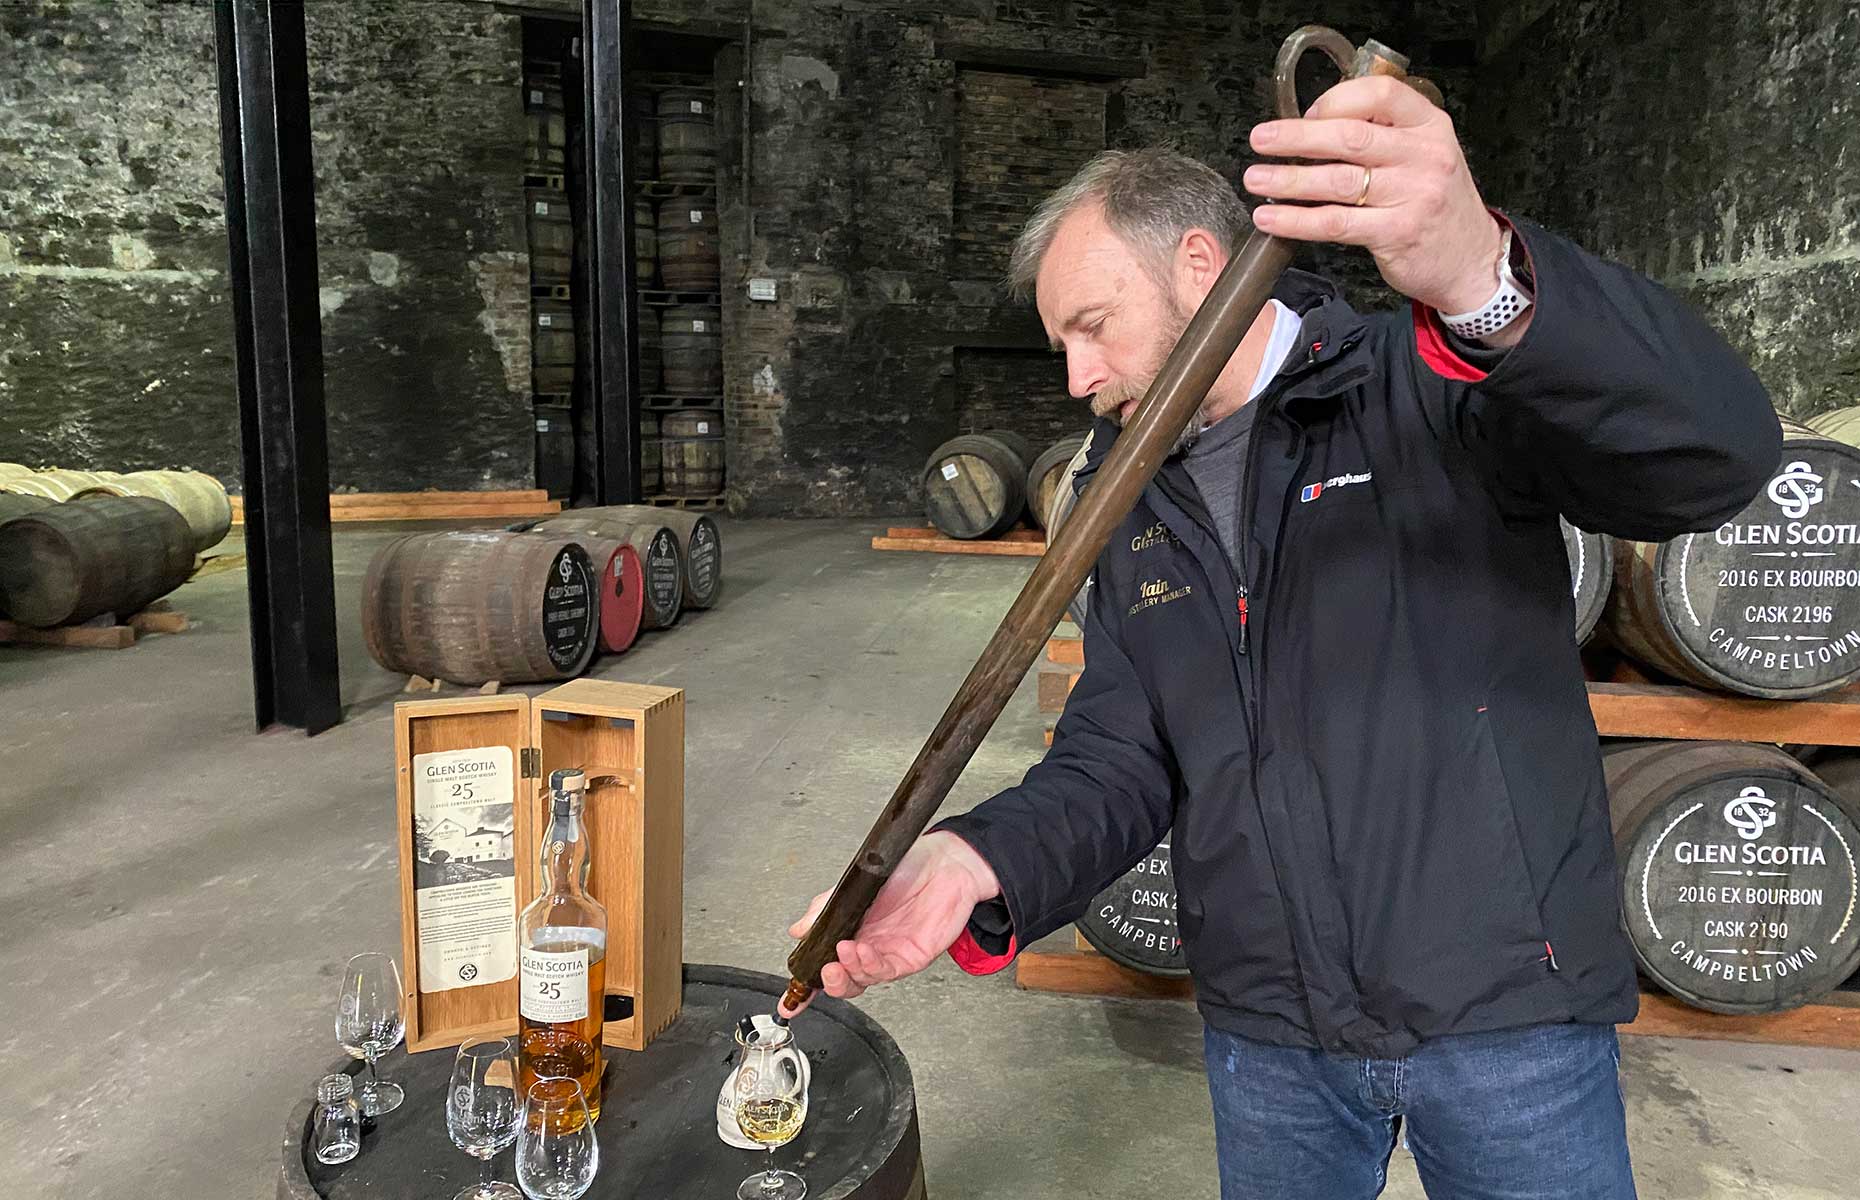 Iain McAlister, pours a wee dram into a glass at the Glen Scotia distillery in Campbeltown, Scotland (Image: Copyright Robin McKelvie)